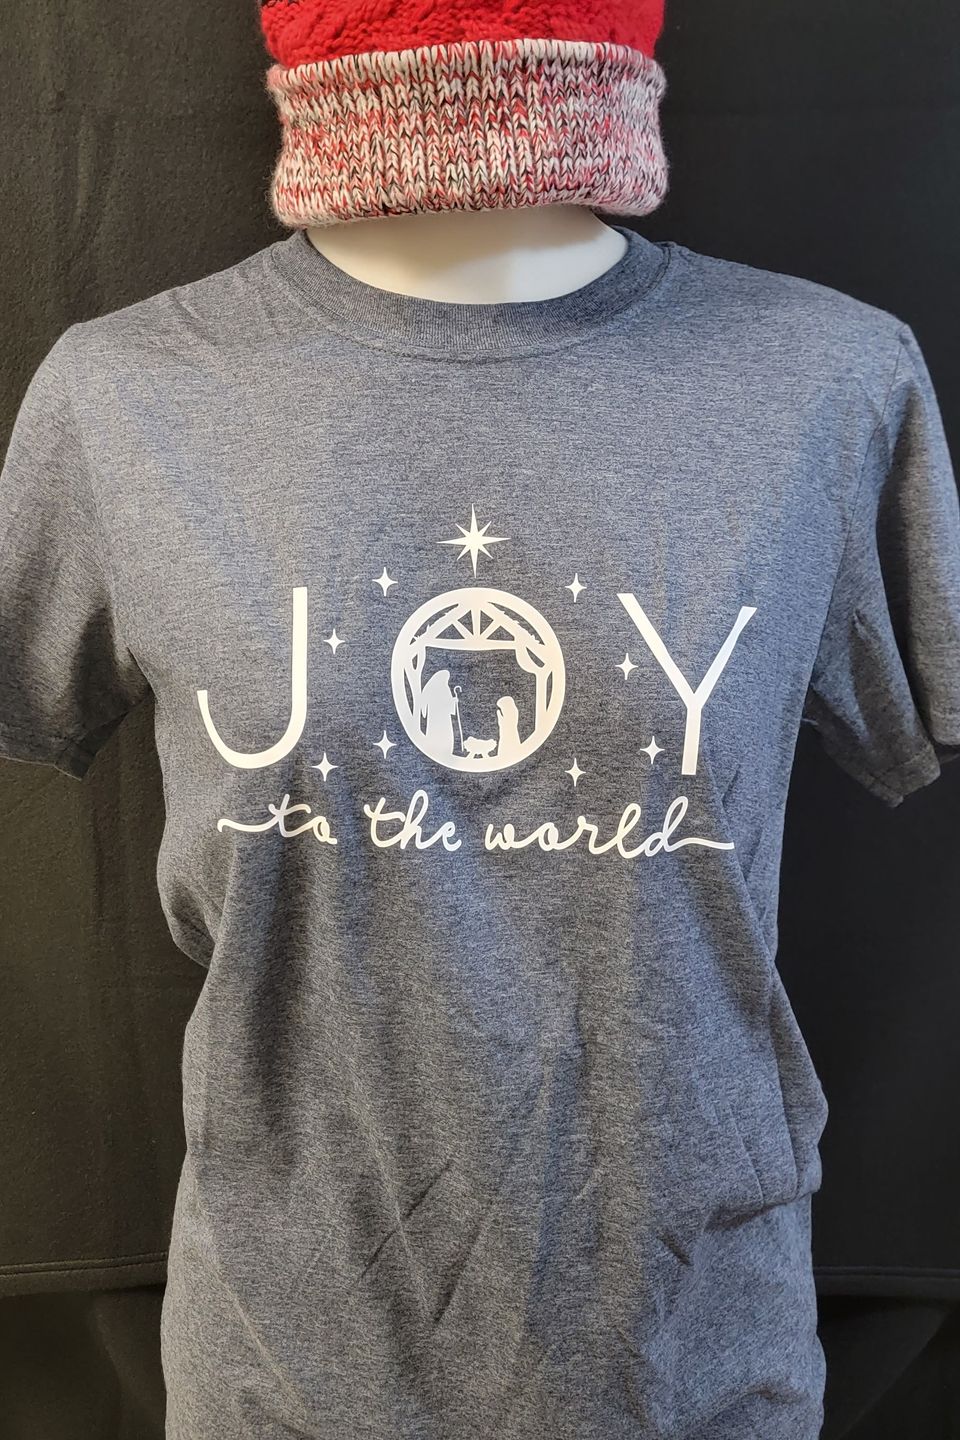  Joy to the world on a t-shirt designed by SaRi's Creations using Direct to Film (DTF) technique. 